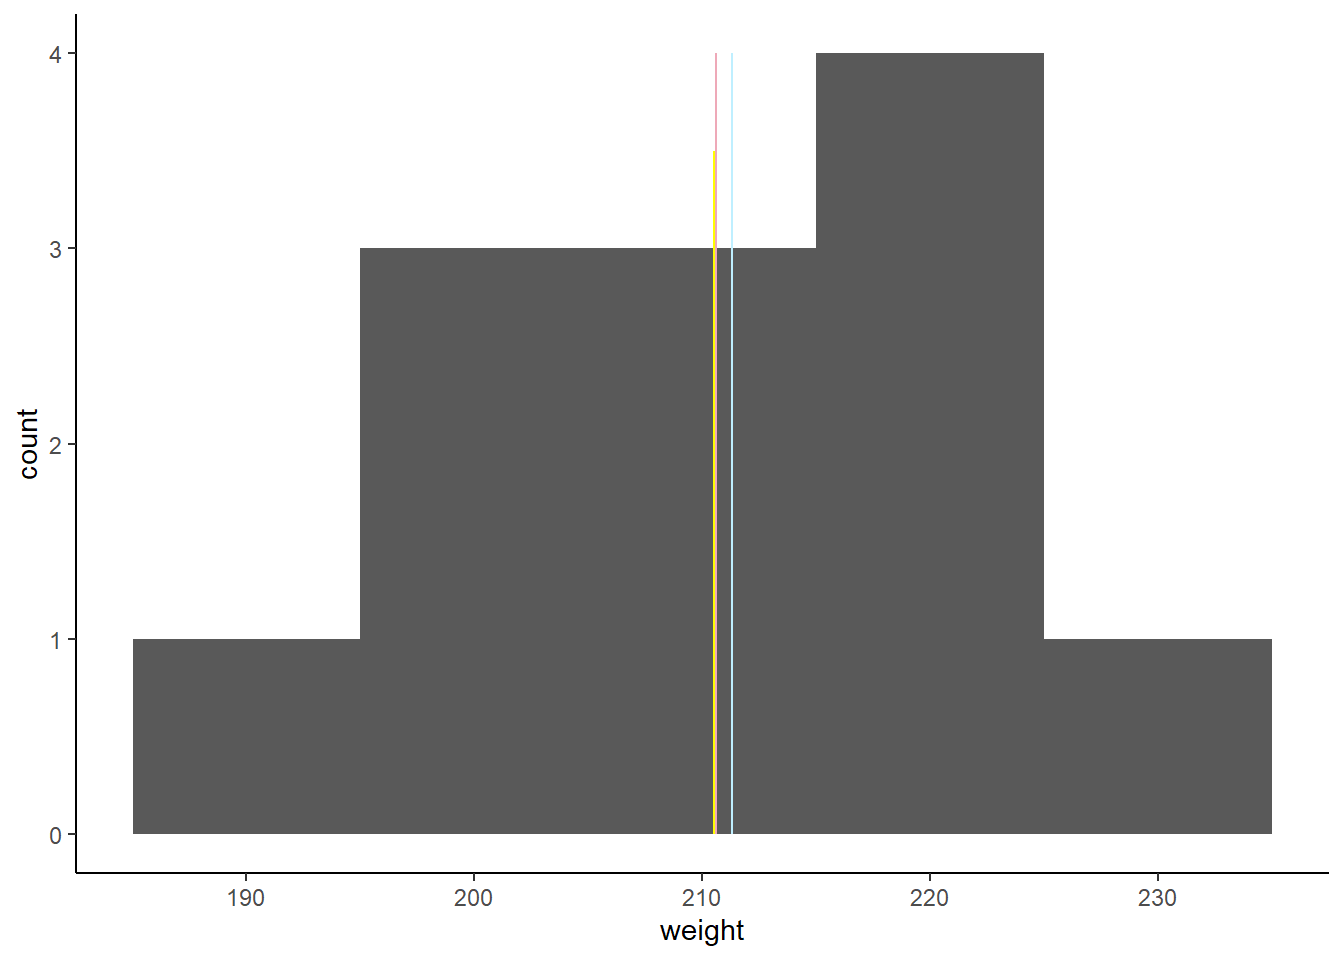 A histogram of heifer weight(kg), mean, median and mode shown